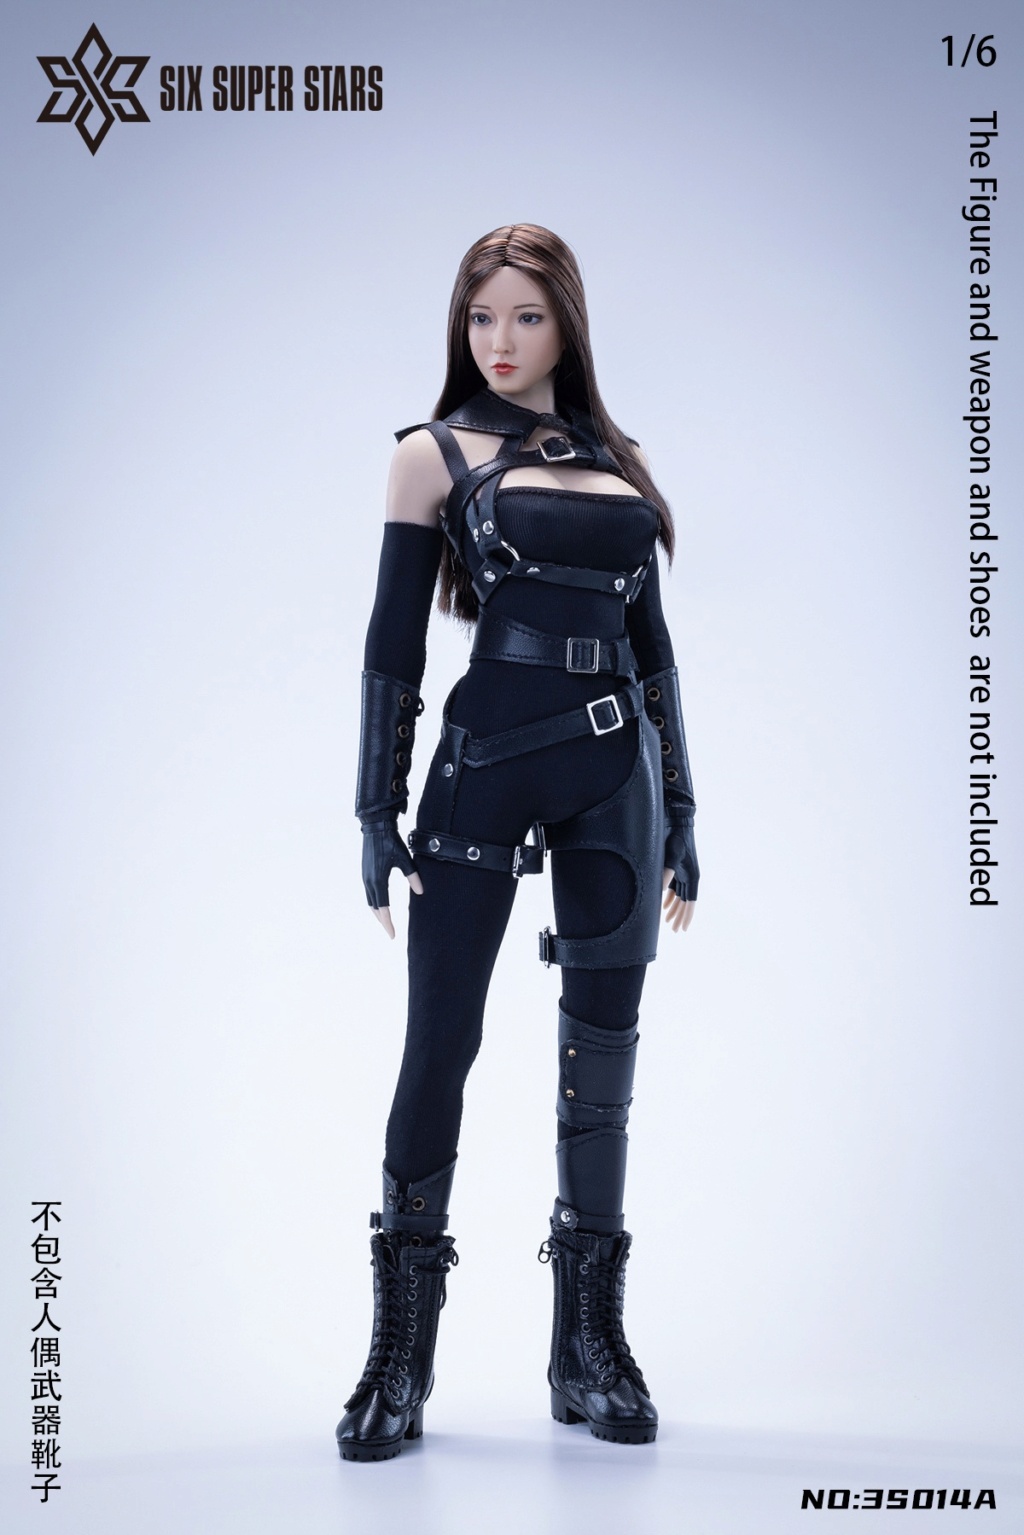 SixSuperStars - NEW PRODUCT: Six Super Stars: 1/6 Shooter Tights Female Soldier Dolls Without HeadCarving Gel Body 3S014A/B 10190411